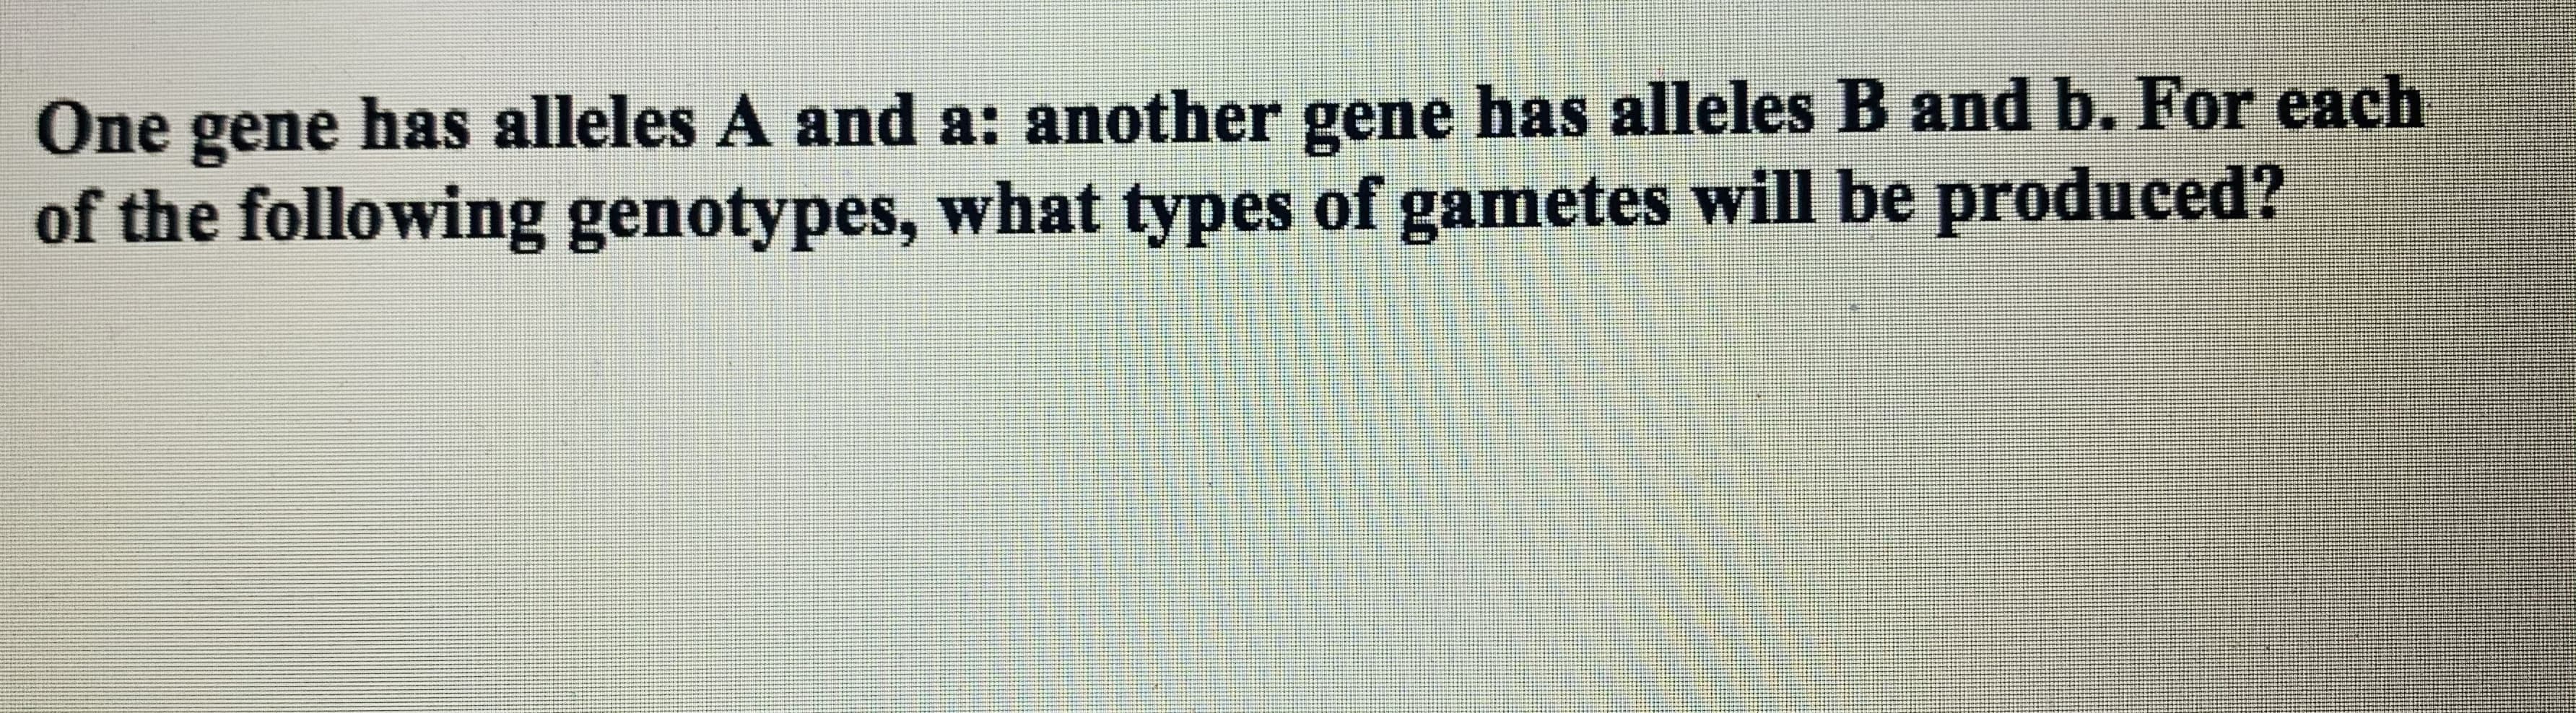 One gene has alleles A and a: another gene has alleles B and b. For each
of the following genotypes, what types of gametes will be produced?
